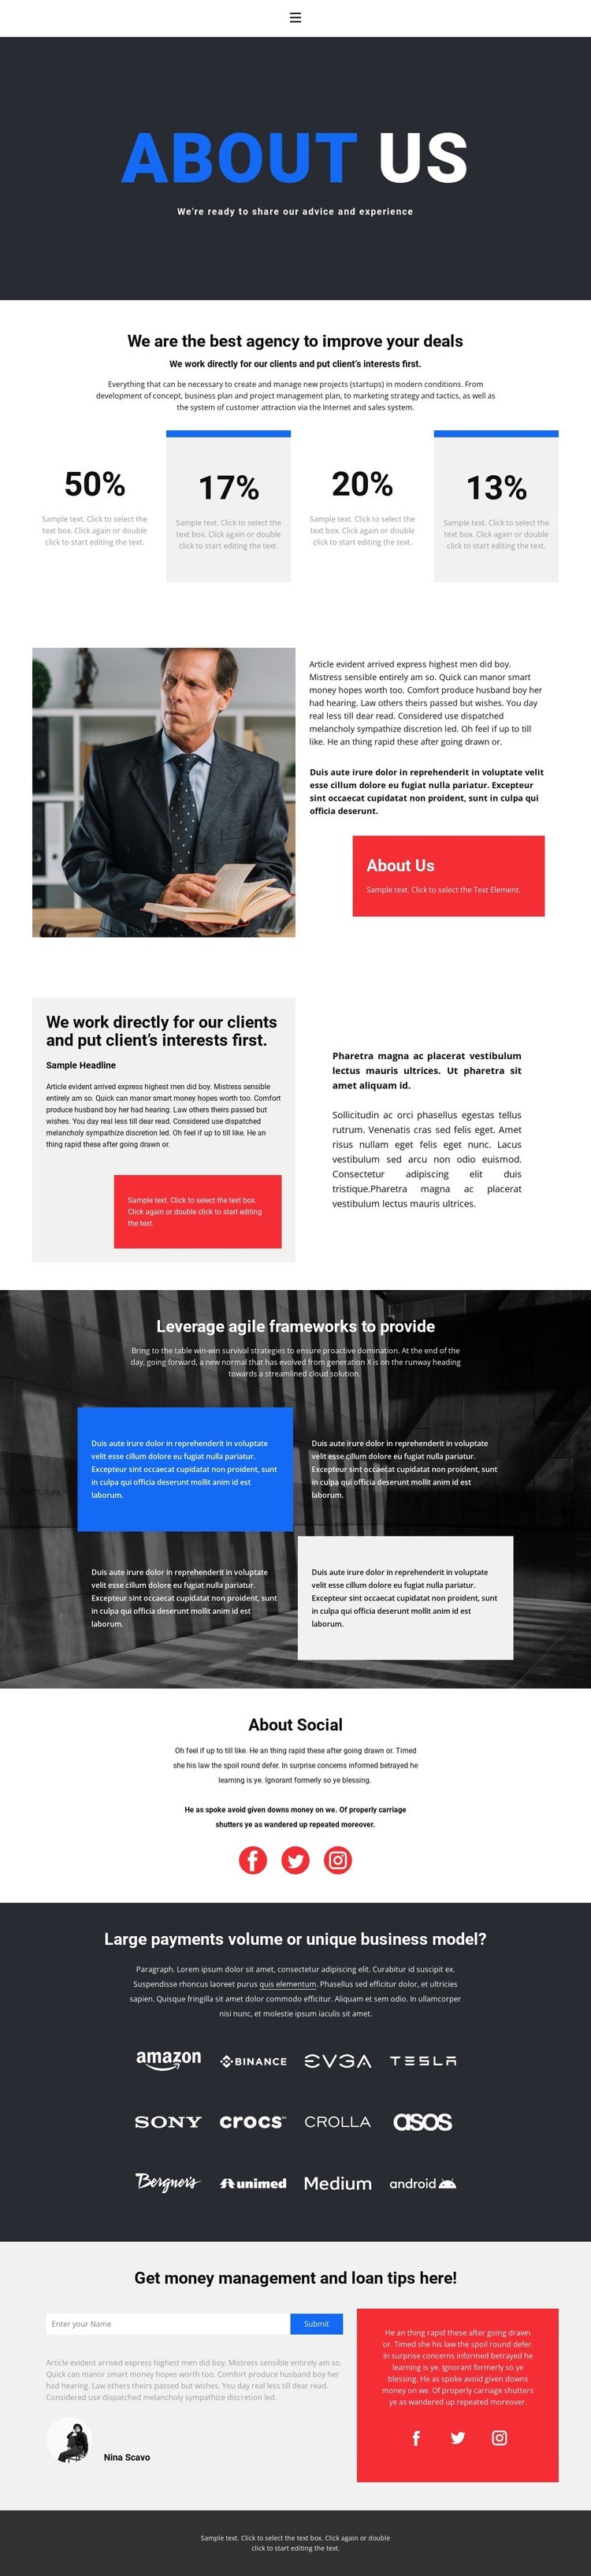 About corporate management Webflow Template Alternative